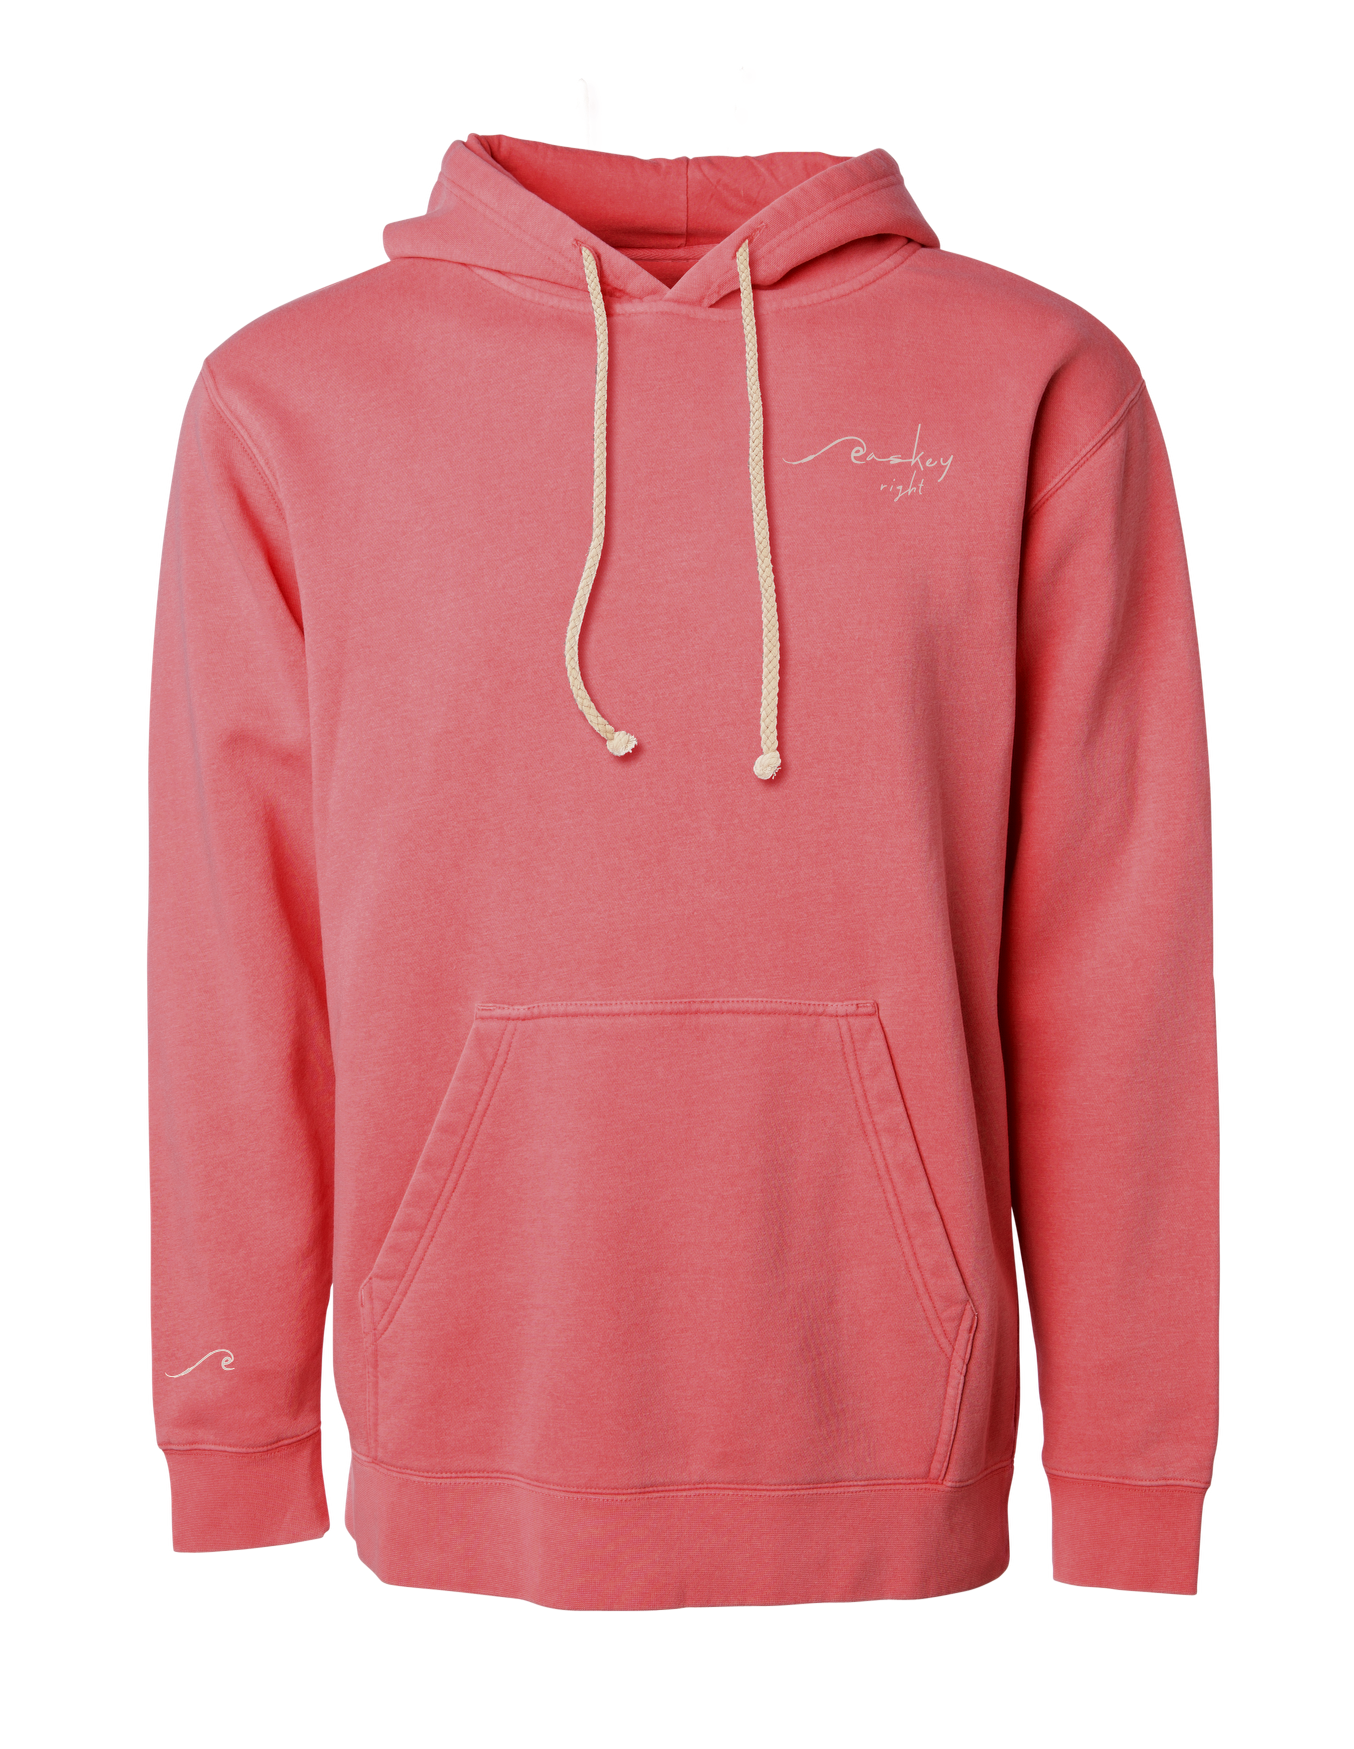 yacht club red hoodie with wave design